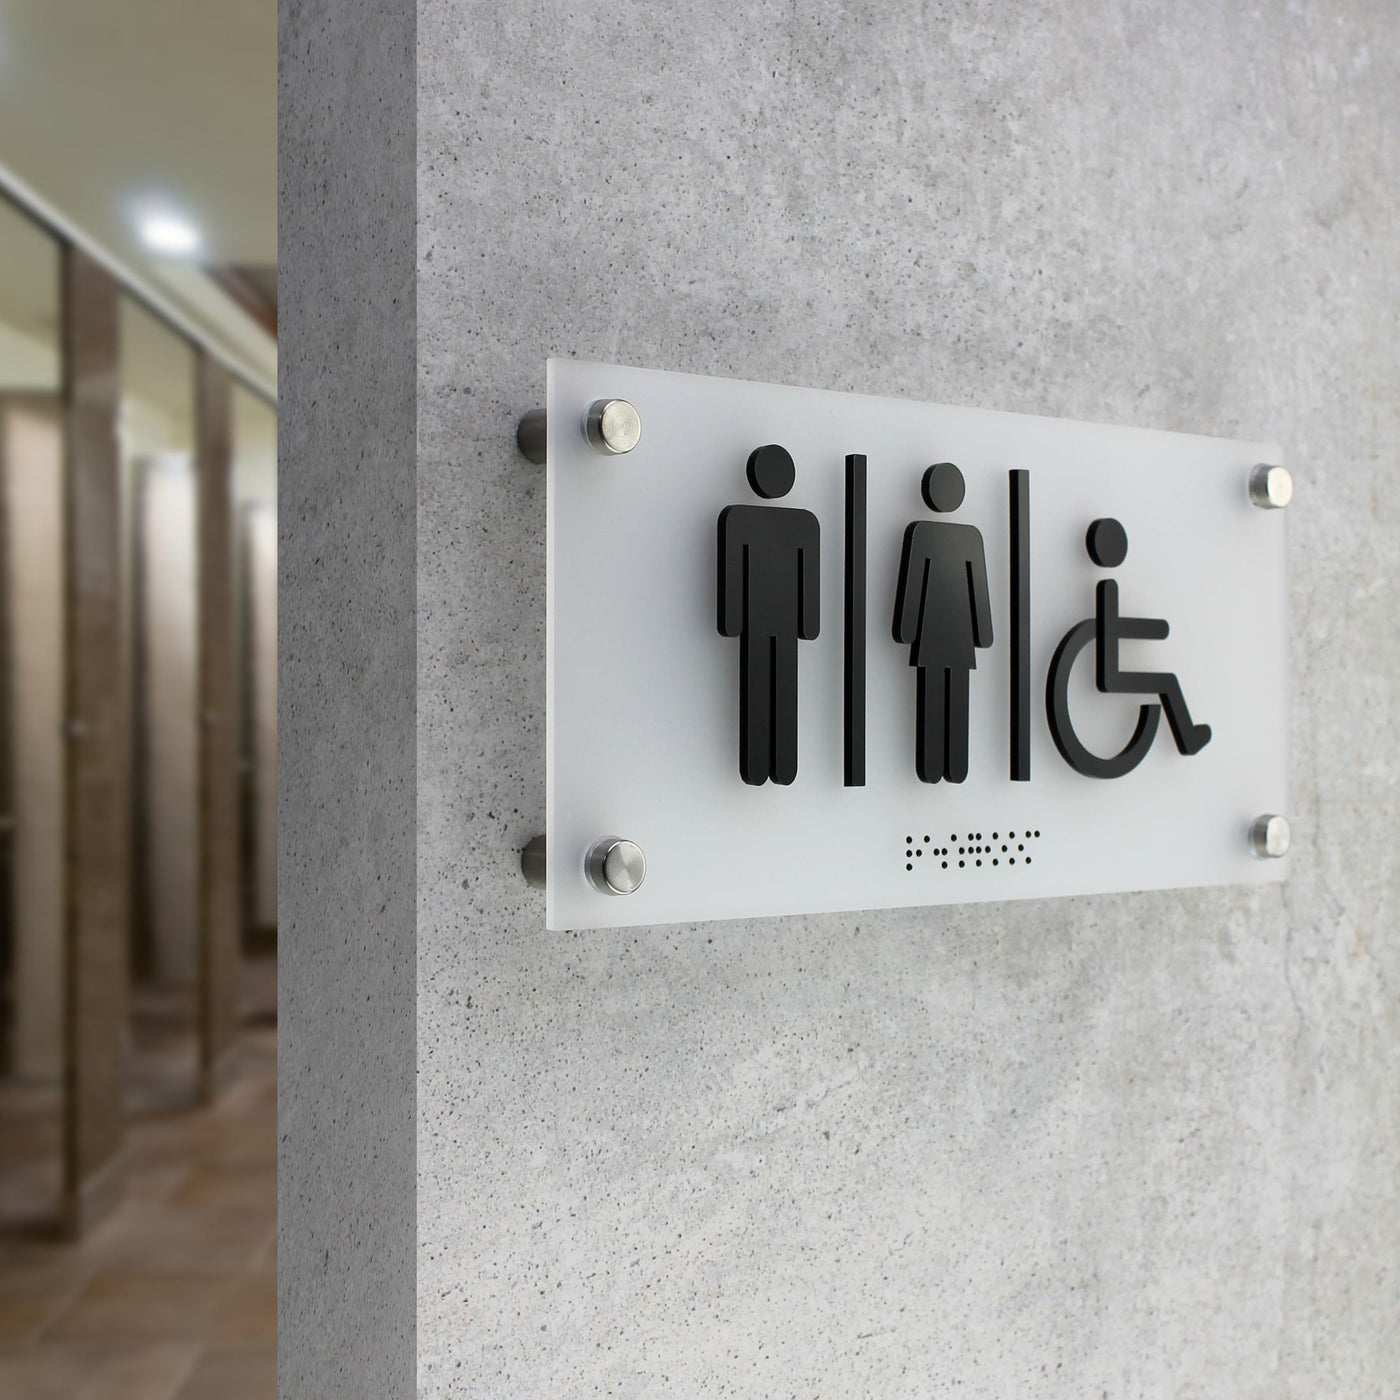 Acrylic All Gender Restroom Sign with Steel Holders "Classic" Design